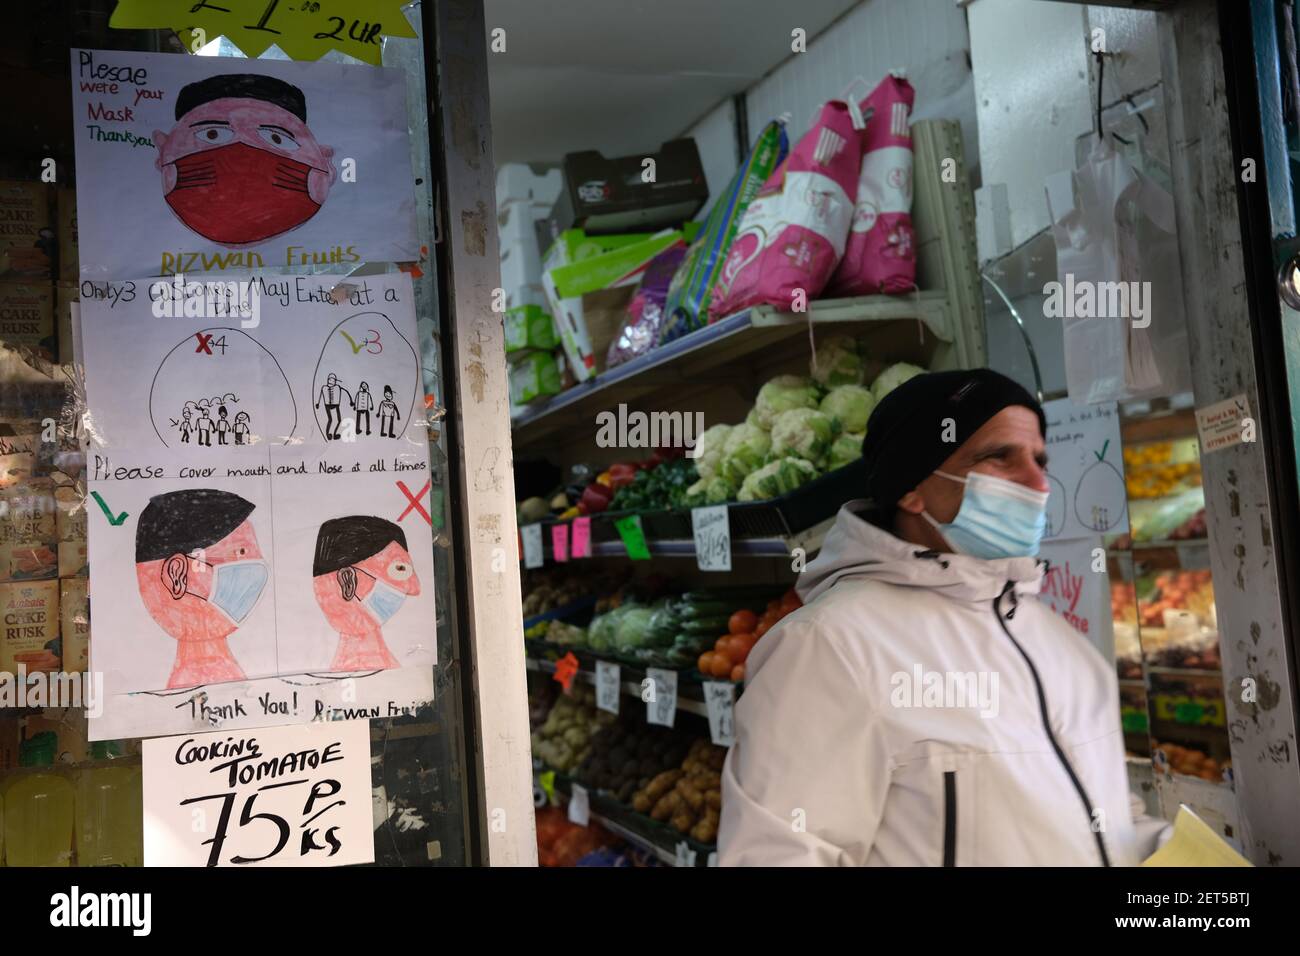 Glasgow, UK, on 1 March 2021. A child's hand-drawn signs on a vegetable shop's door directing customers to maintain the safety protocols and to wear masks. Over 1.5 million people have now had their first Covid-19 CoronaVirus vaccination in Scotland. Photo credit: Jeremy Sutton-Hibbert/Alamy Live News. Stock Photo